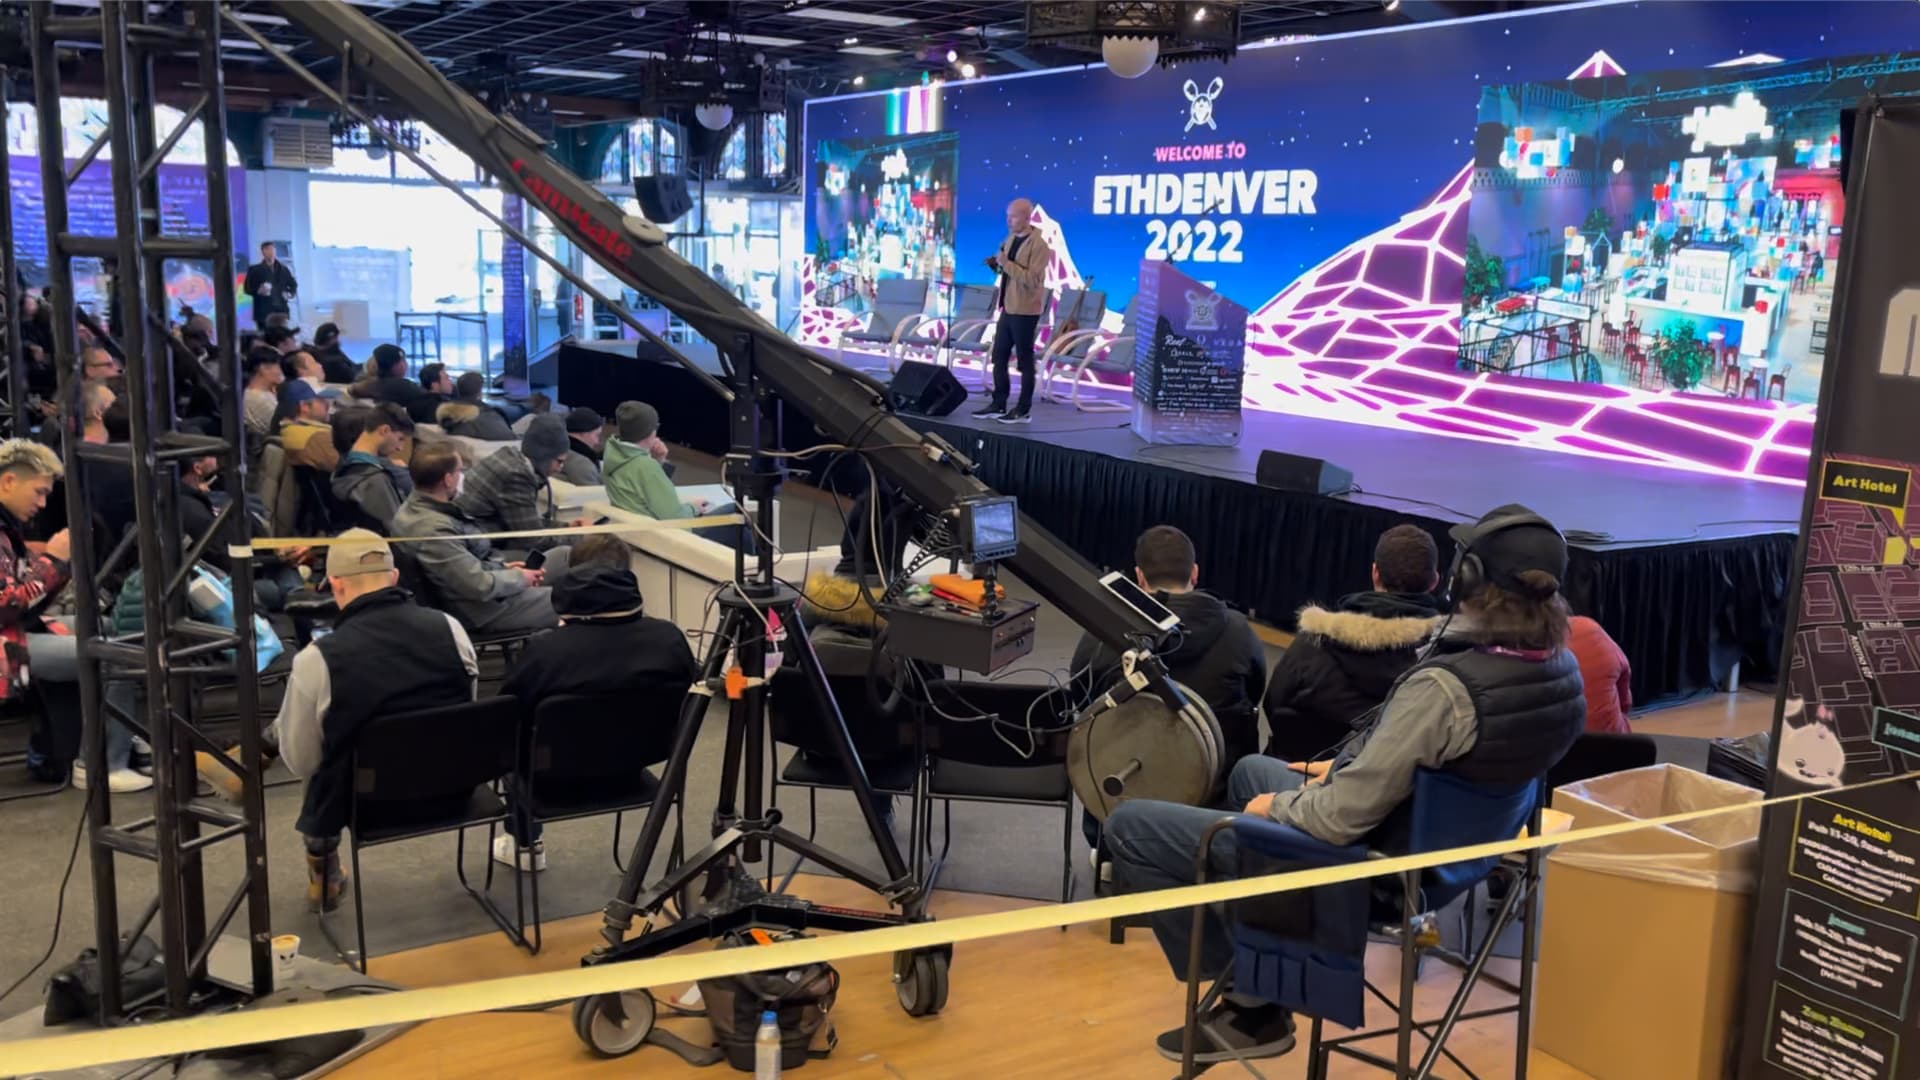 ETHDenver 2022 draws thousands of ethereum enthusiasts